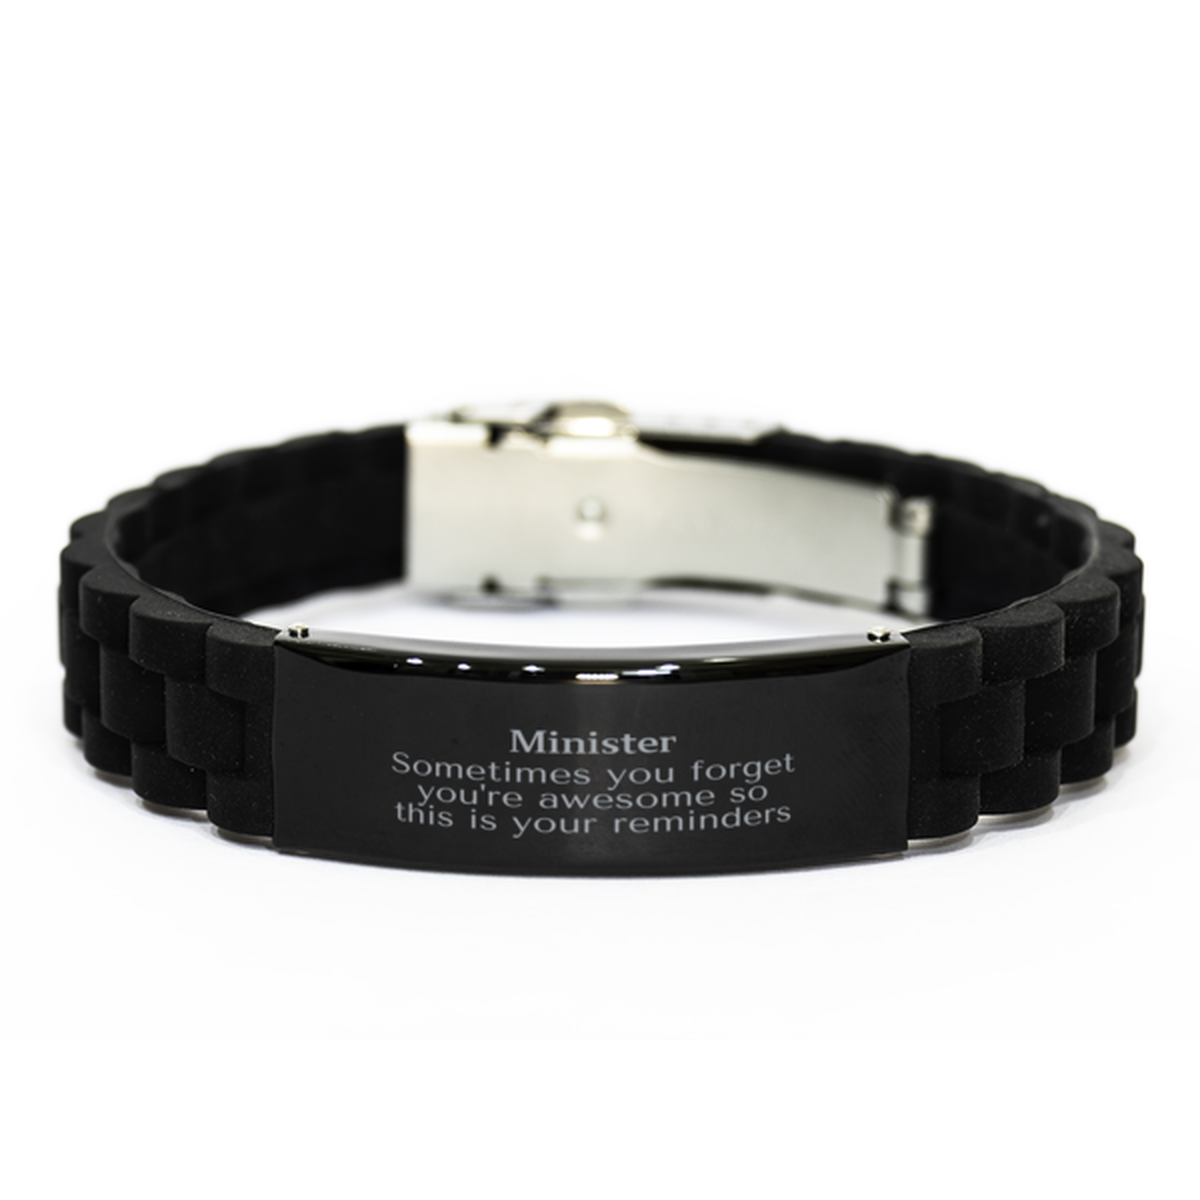 Sentimental Minister Black Glidelock Clasp Bracelet, Minister Sometimes you forget you're awesome so this is your reminders, Graduation Christmas Birthday Gifts for Minister, Men, Women, Coworkers